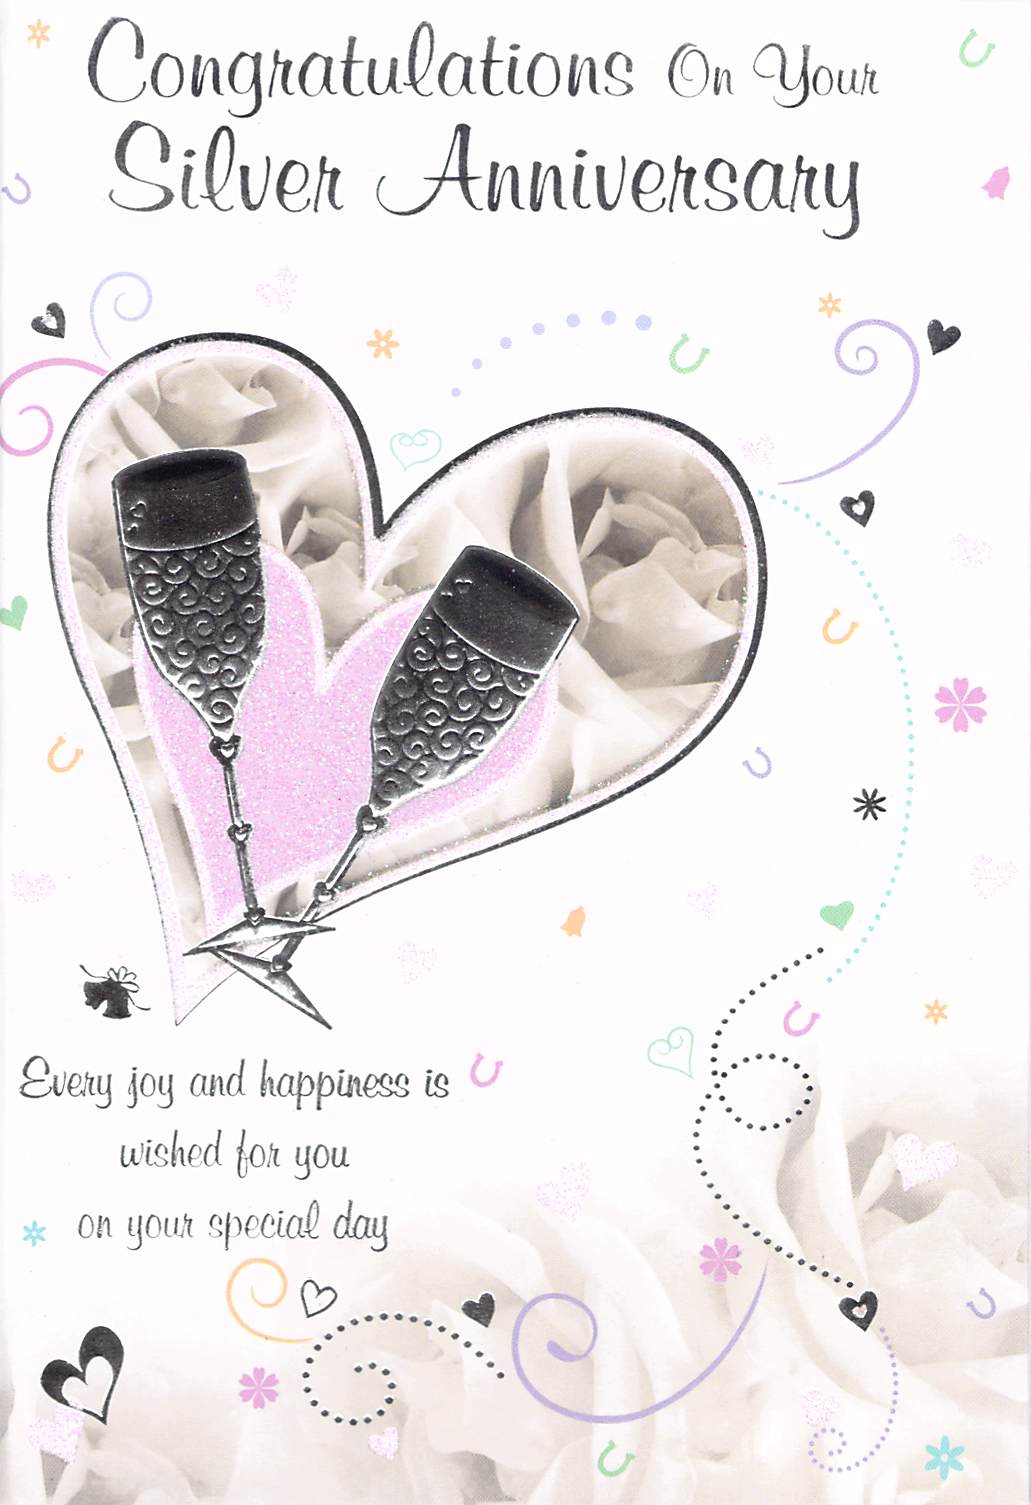 Anniversary (Silver) - Greeting Card -Multi Buy Discount - Free P&P